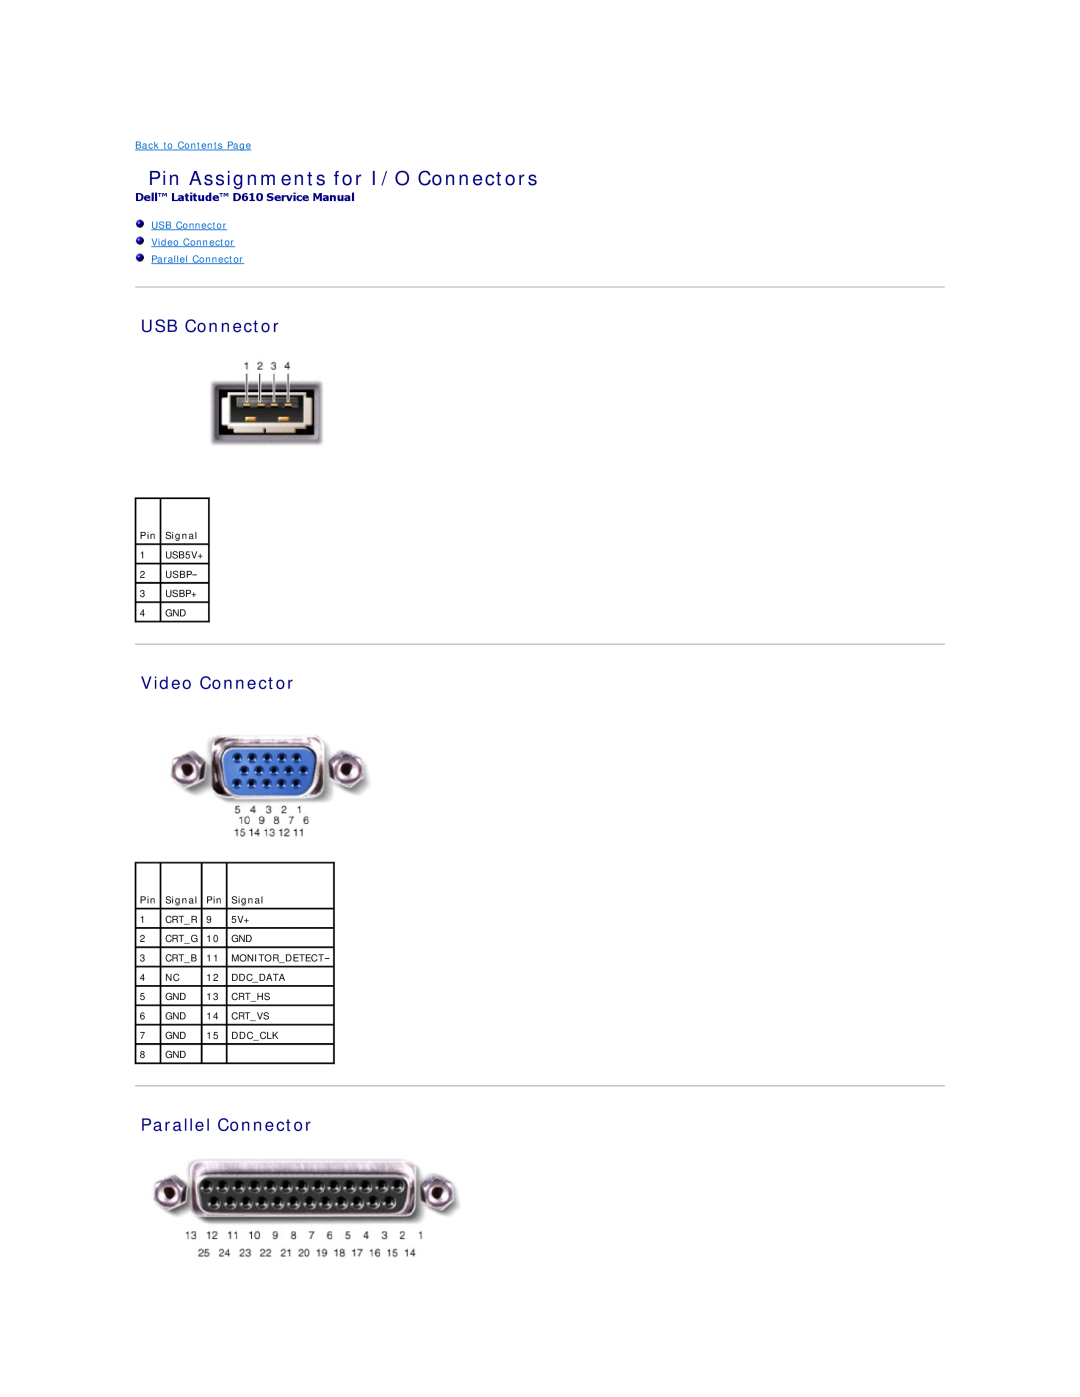 Dell D610 manual Pin Assignments for I/O Connectors, USB Connector, Video Connector, Parallel Connector, Pin Signal 